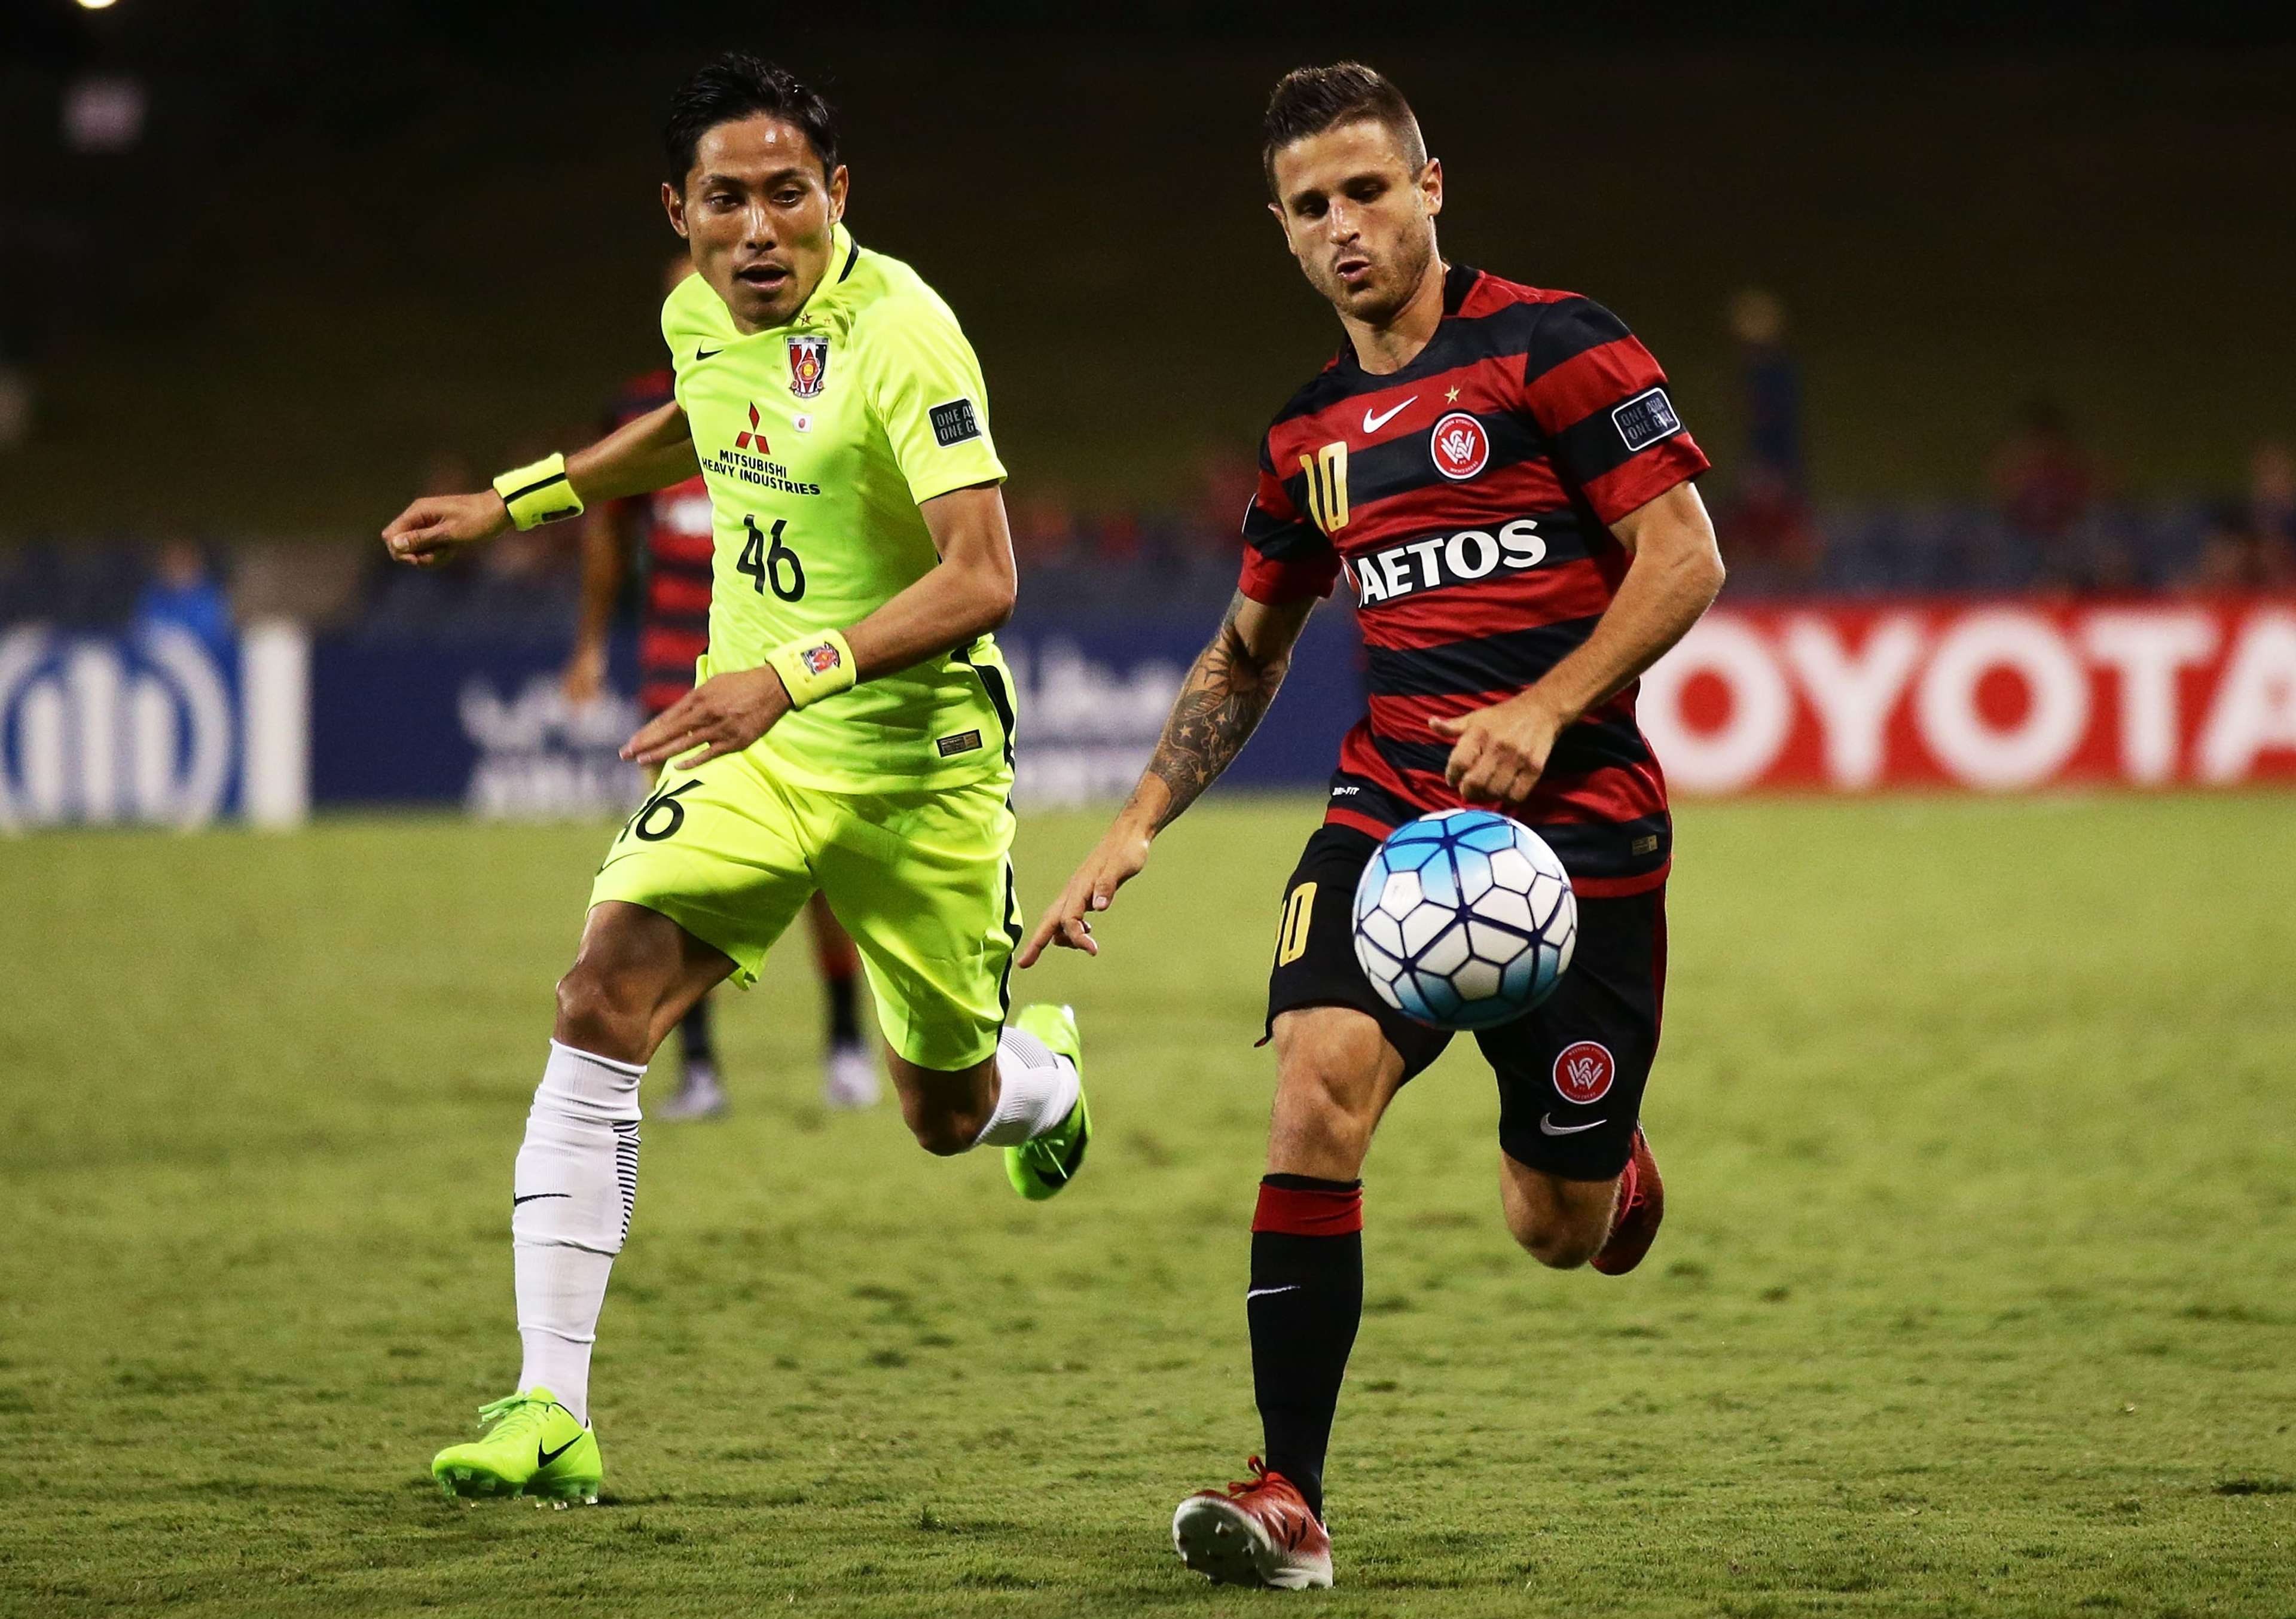 Nicolas Martnez of the Wanderers controls the ball during the AFC Asian Champions League match between the Western Sydney Wanderers and the Urawa Red Diamonds at Campbelltown Sports Stadium on February 21, 2017 in Sydney, Australia.